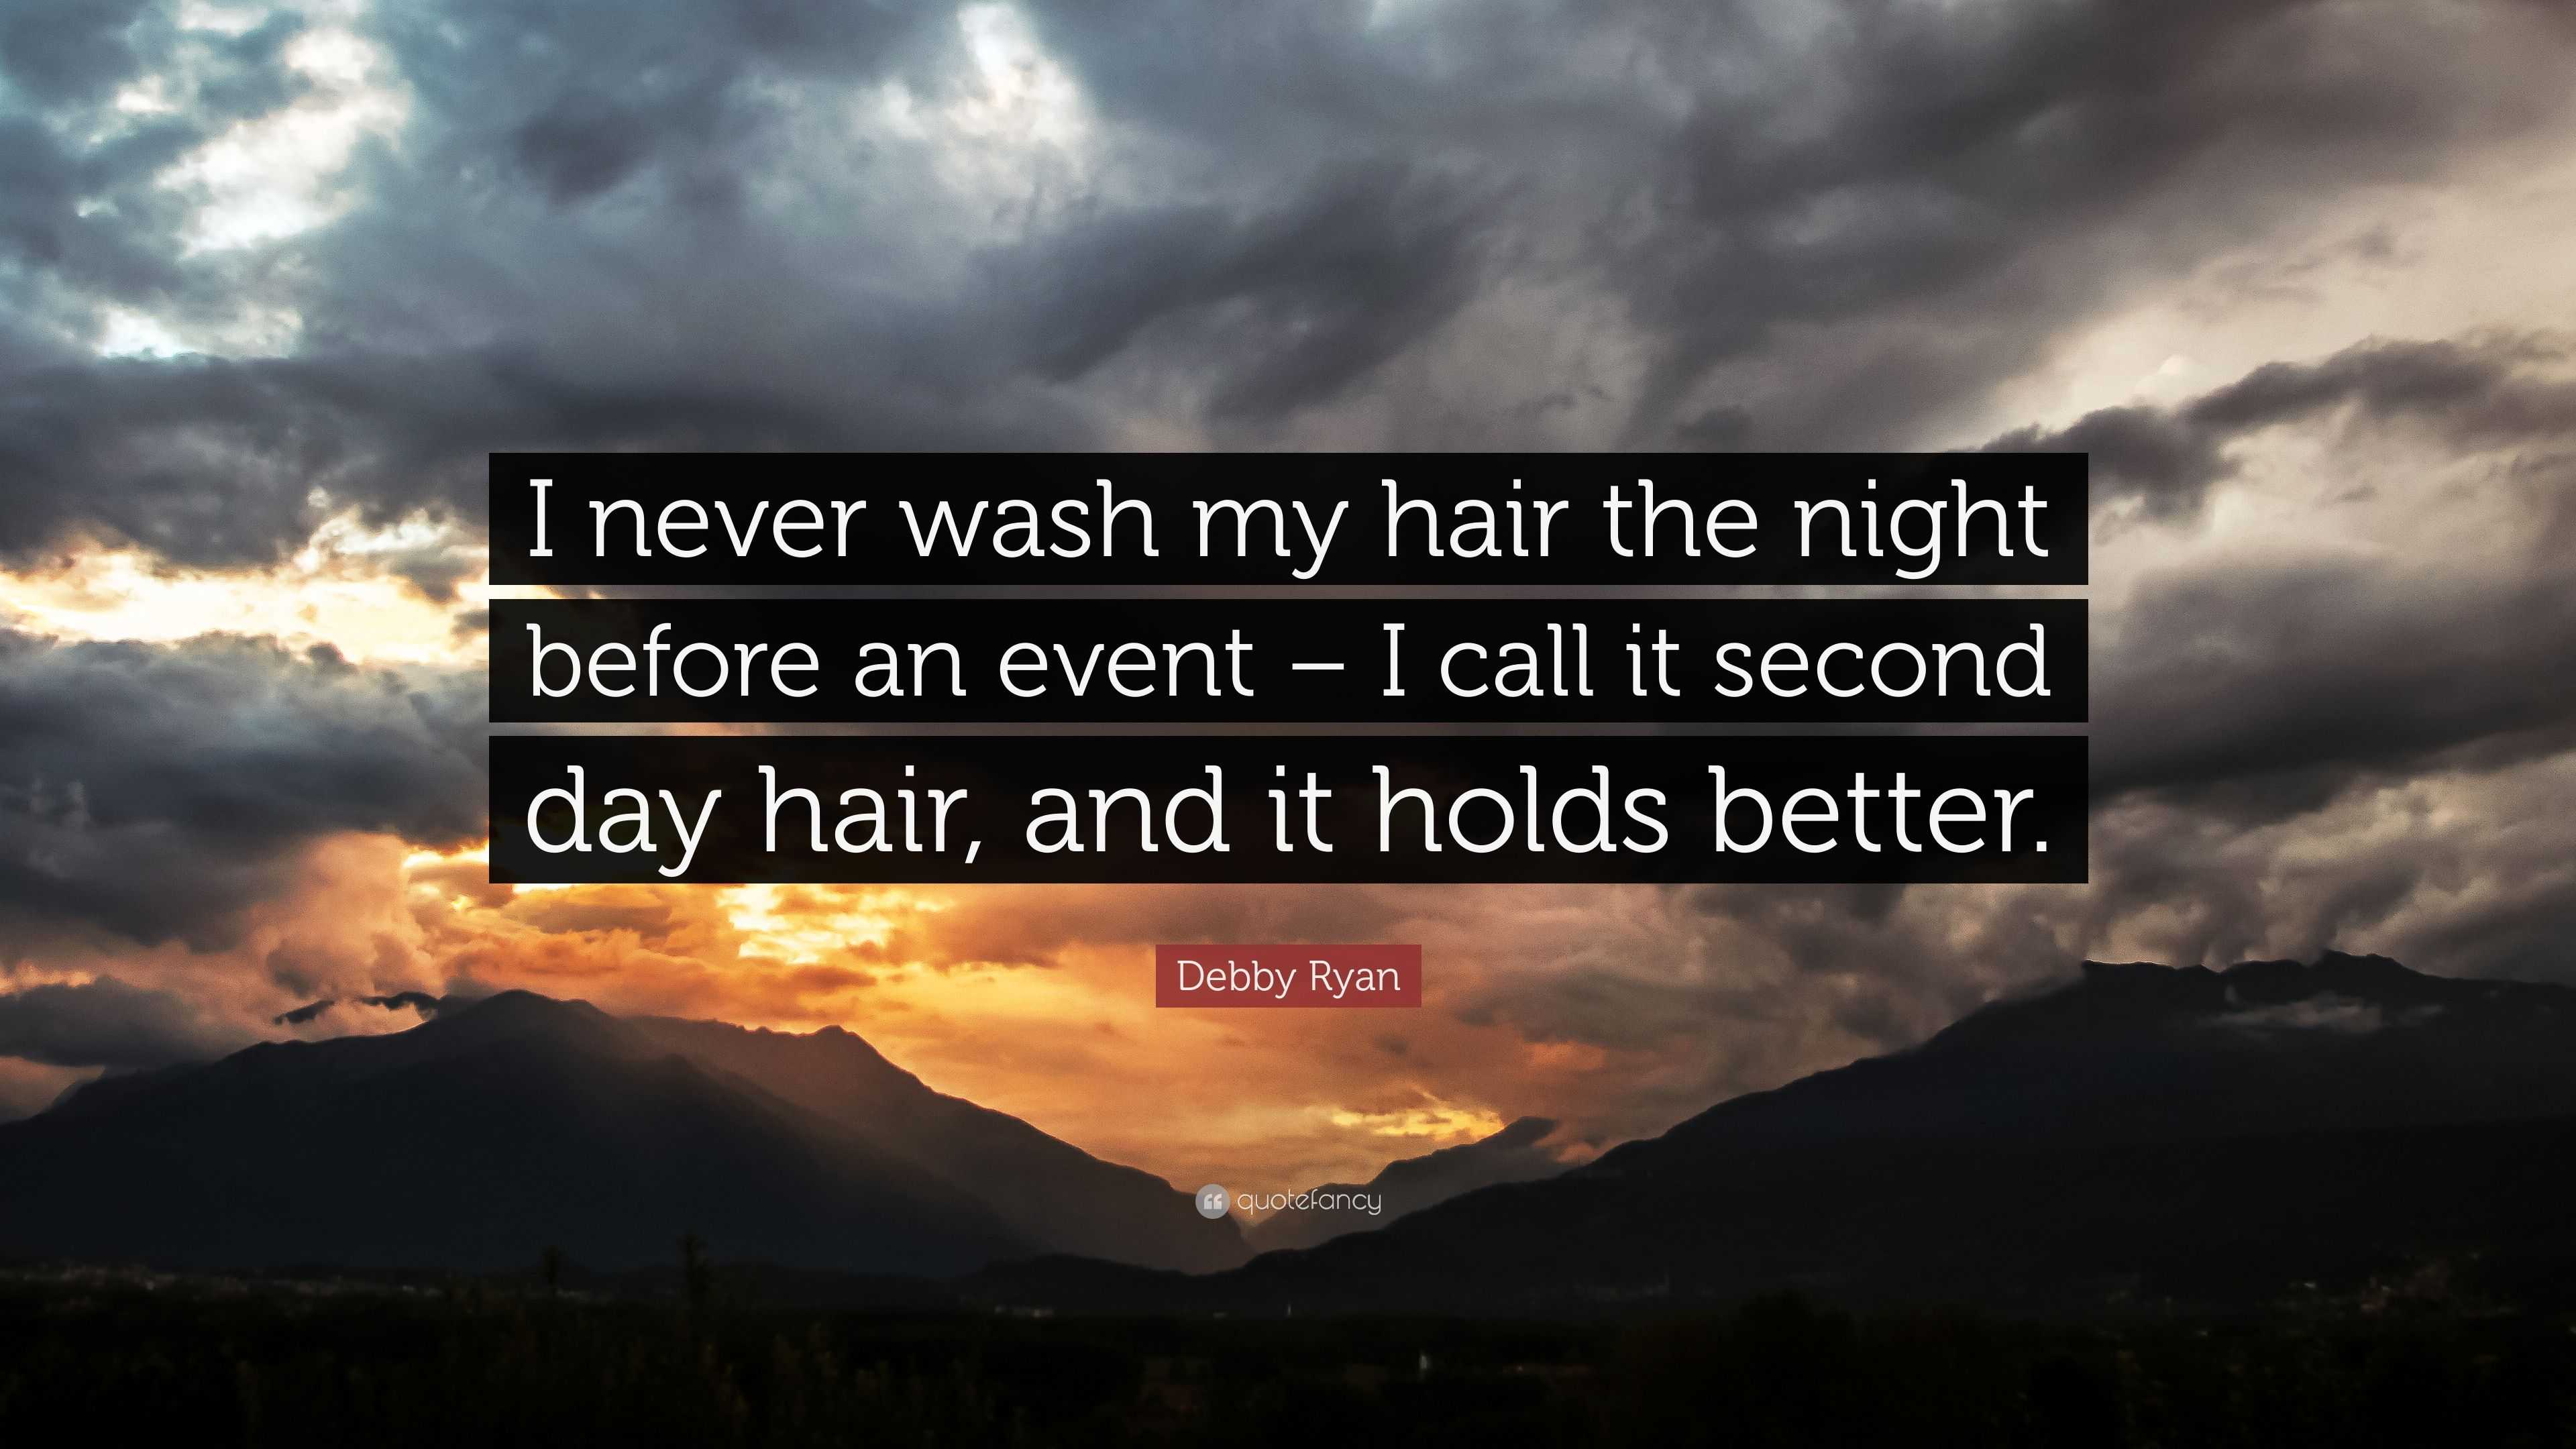 Debby Ryan Quote: “I never wash my hair the night before an event – I call  it